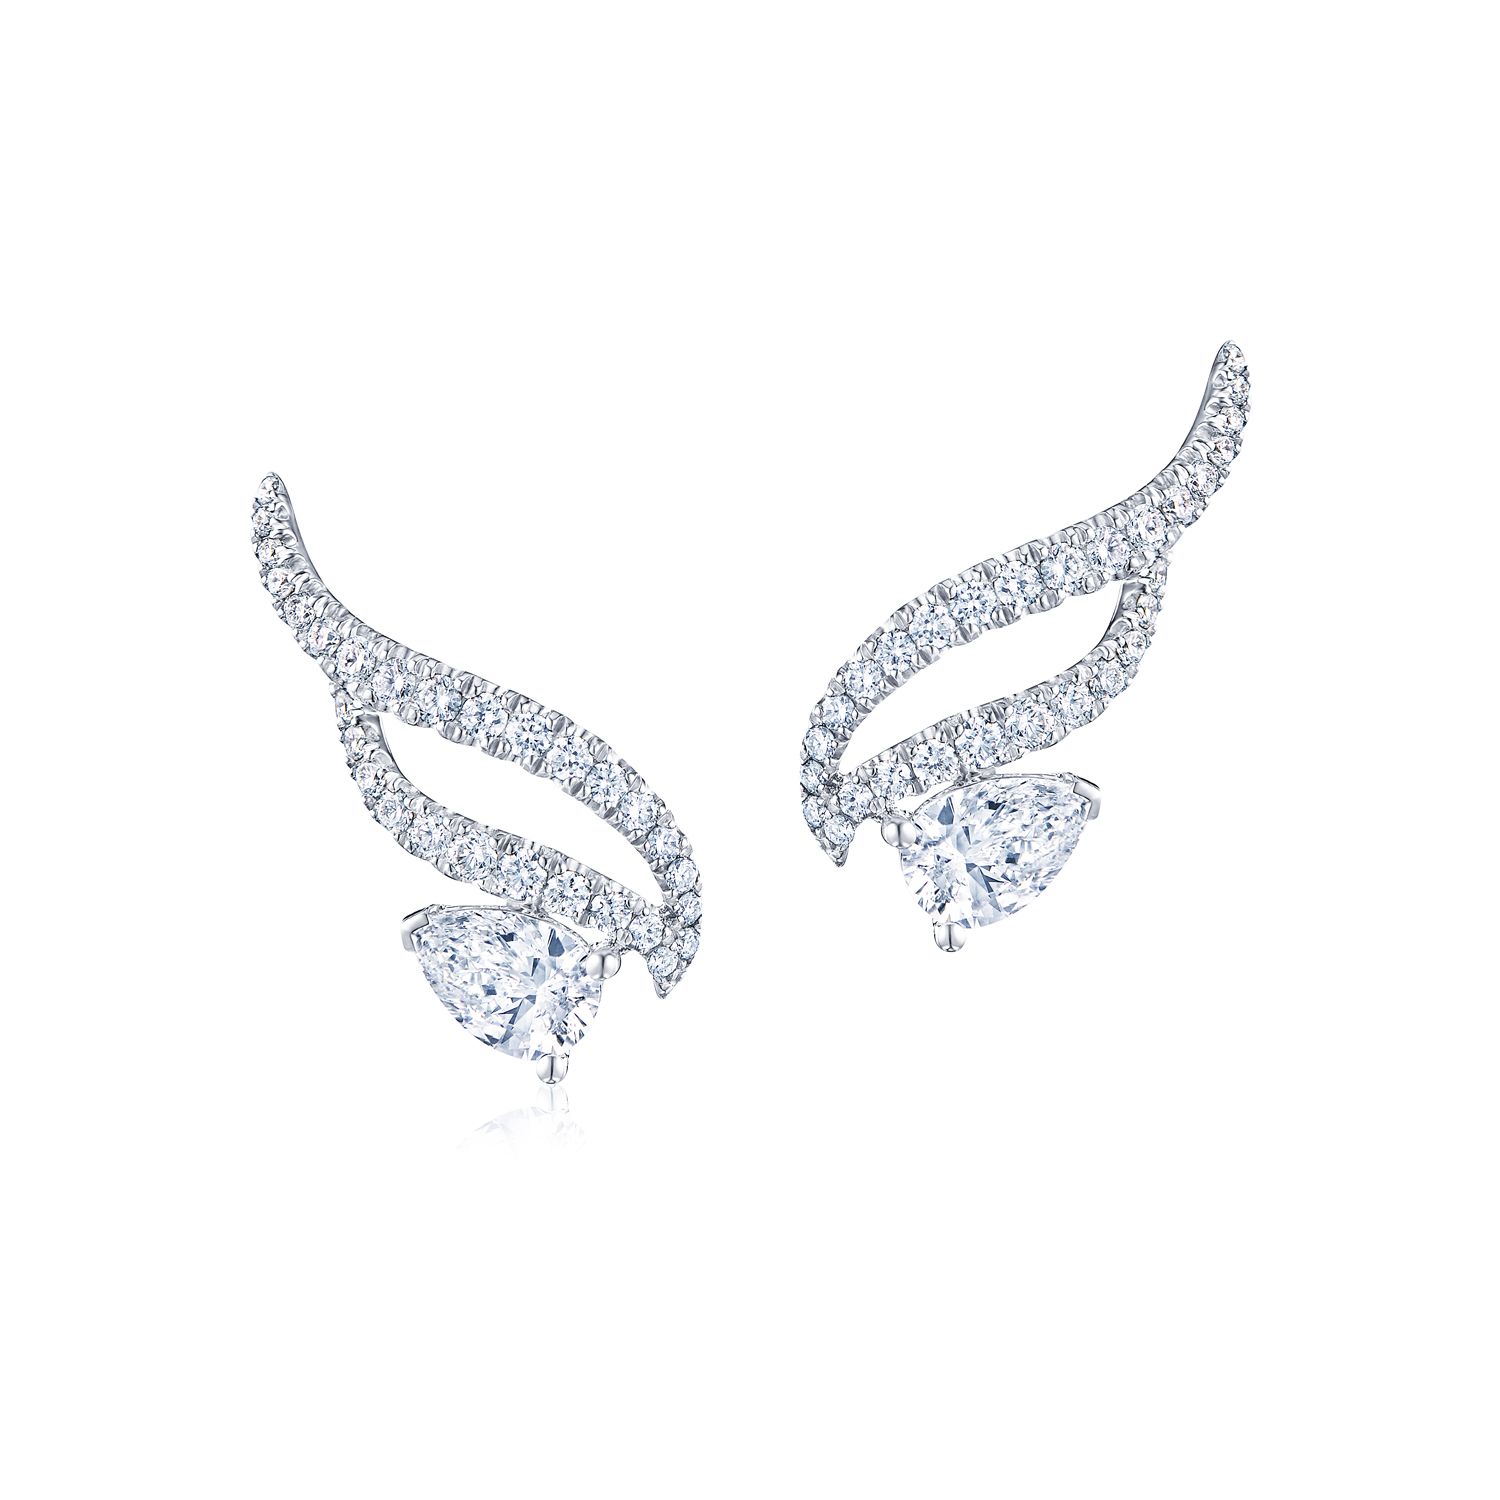 Vine Ear Climbers with Diamond Leaves in 18K White Gold - Kwiat